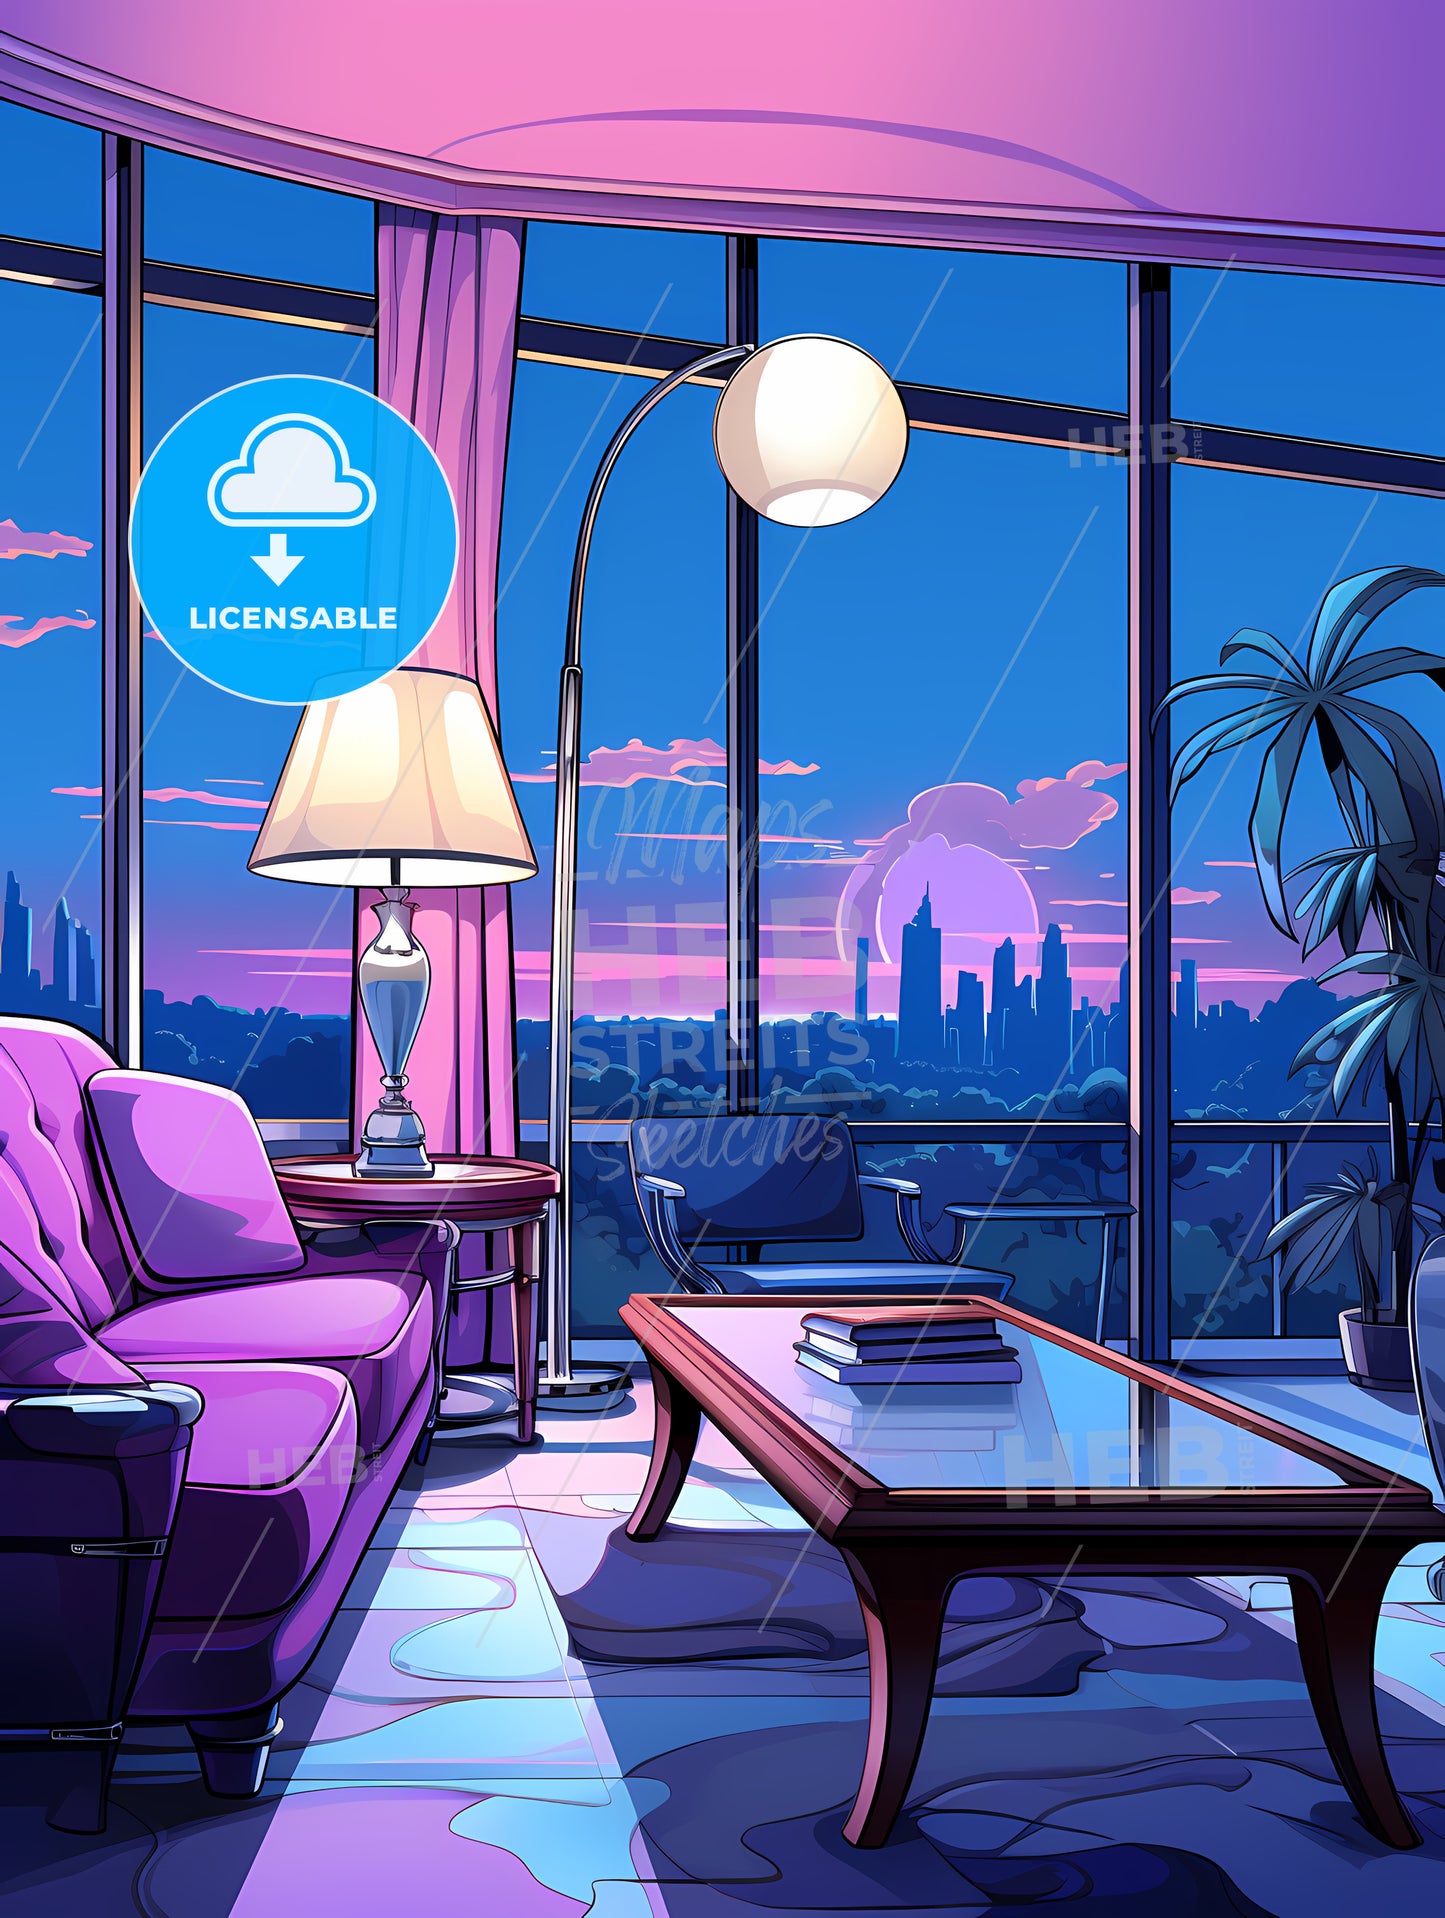 Living Room With A Window View Of A City